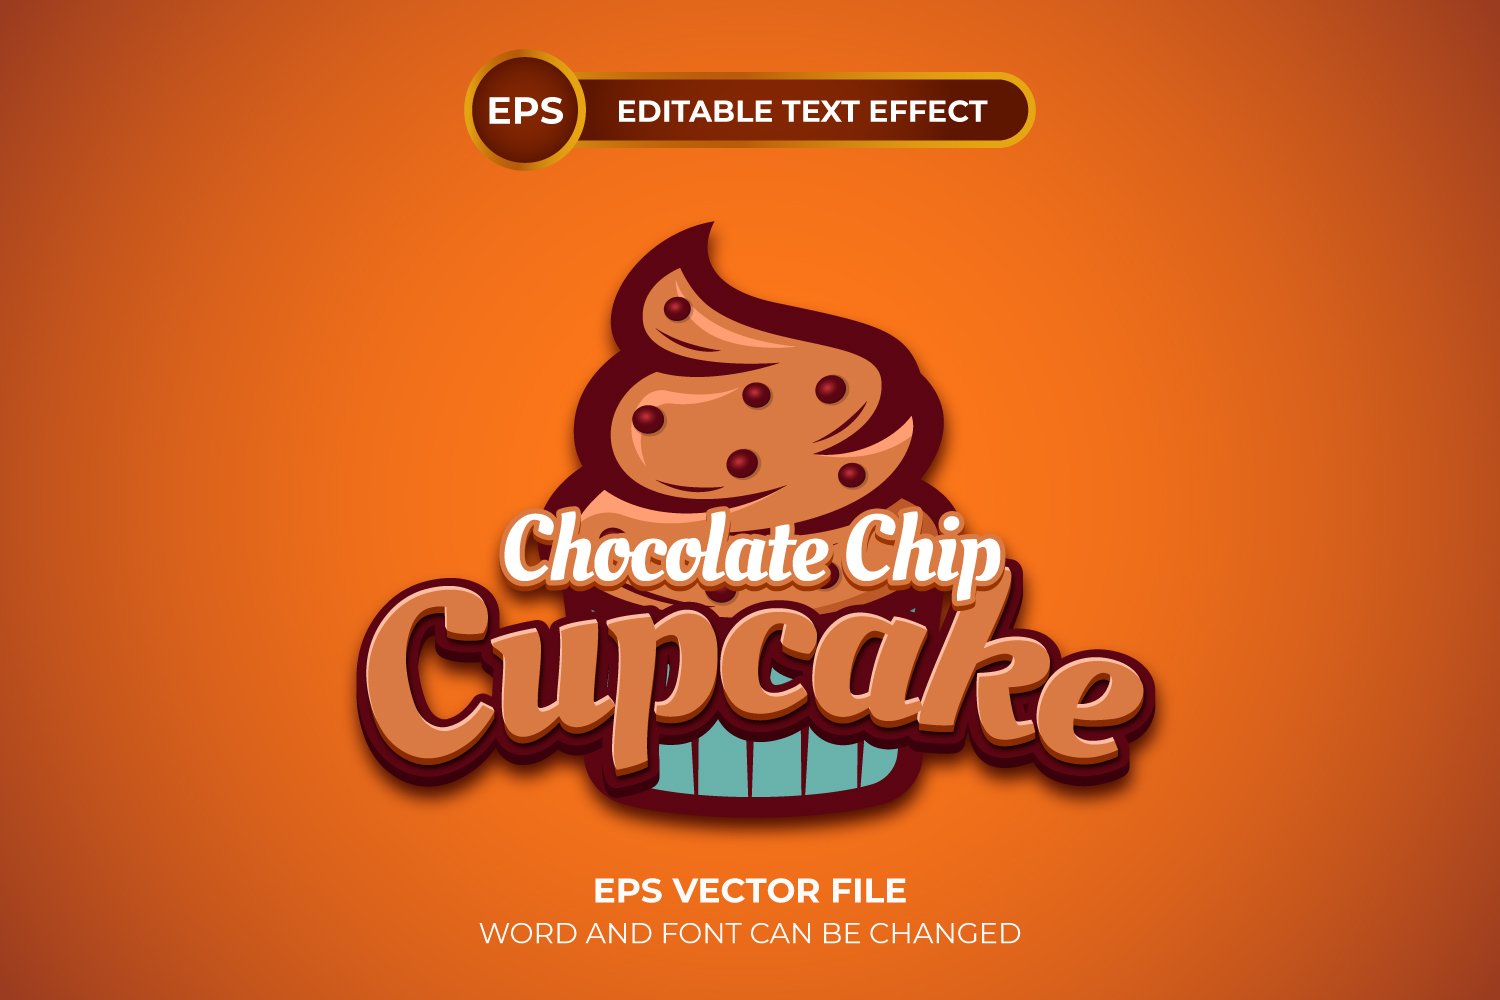 Chocolate chip cupcake cover image.